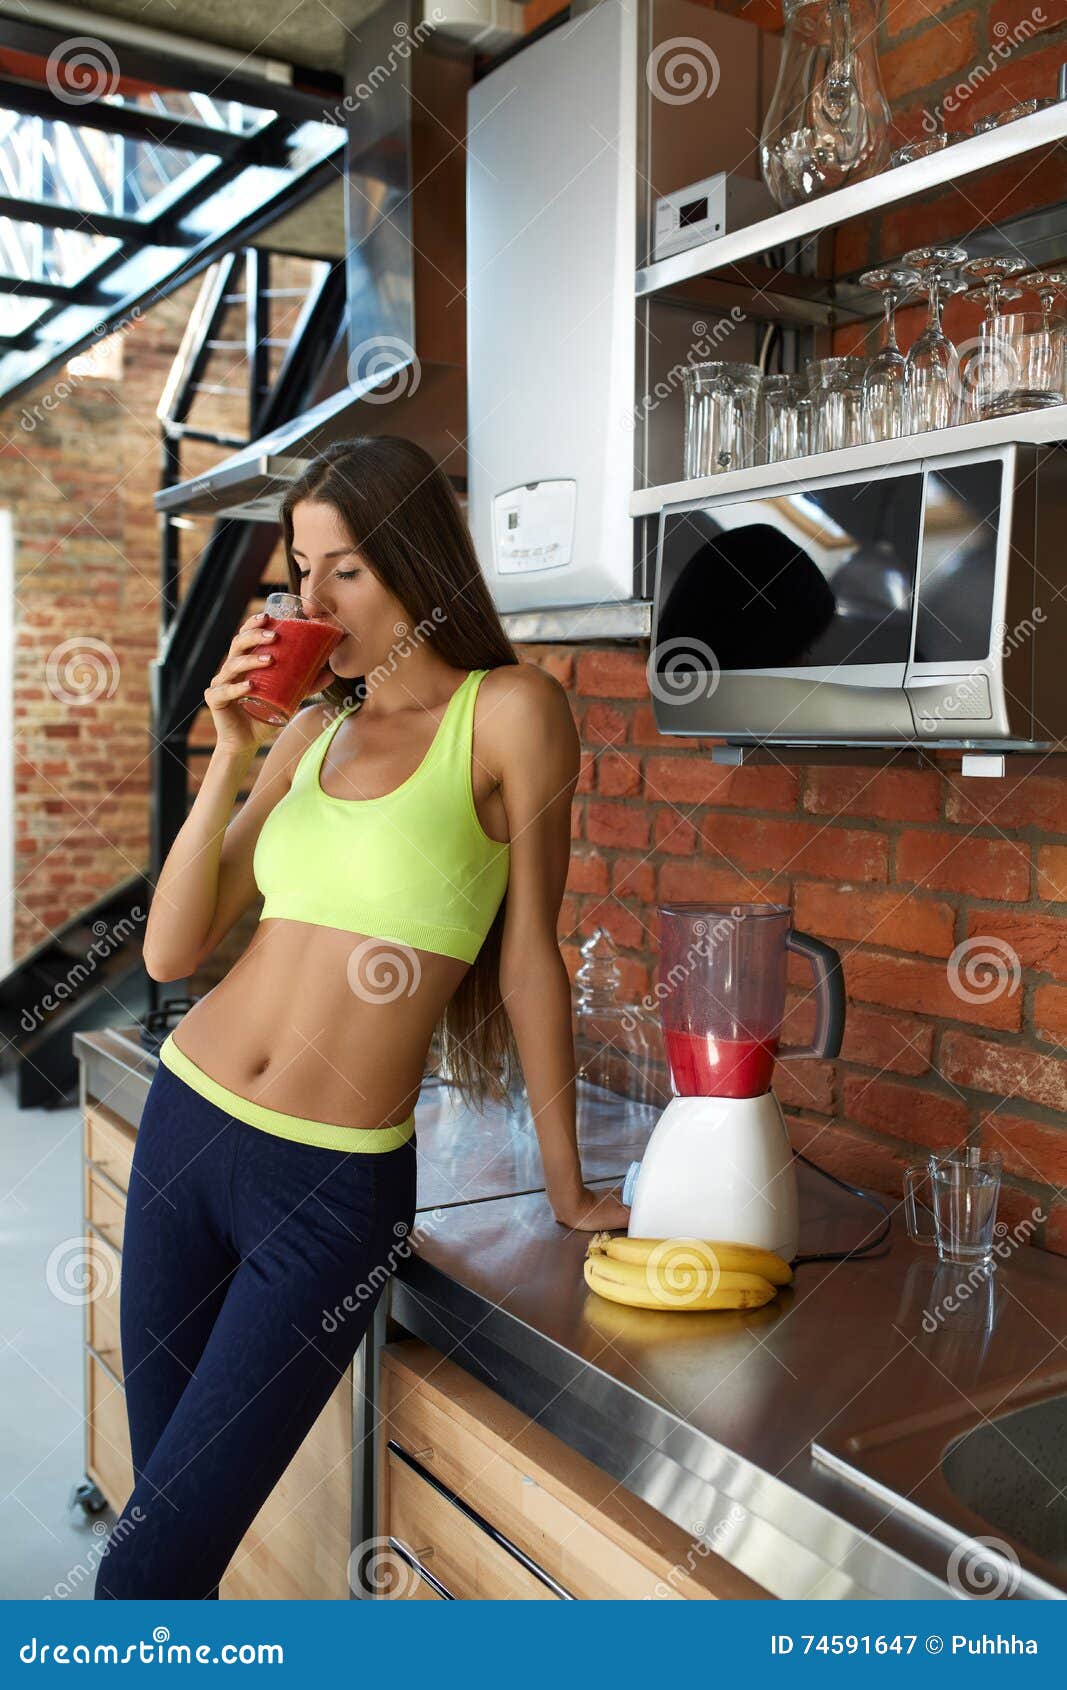 Detox Smoothie Healthy Fit Woman Drinking Diet Fitness Drink Stock Image Image Of Dieting Drinks 74591647